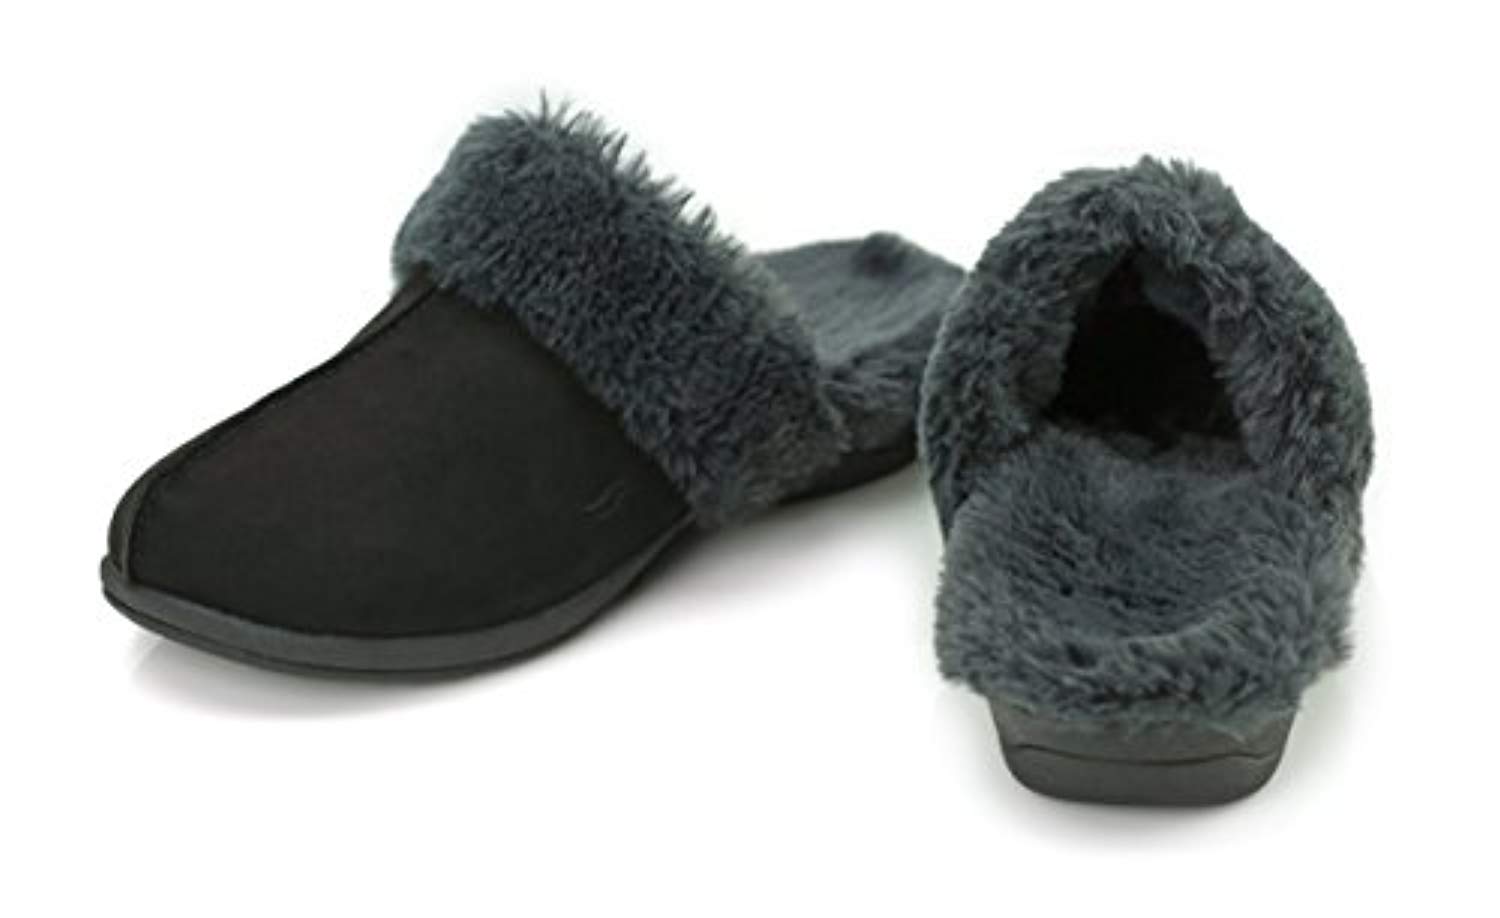 powerstep luxe slippers